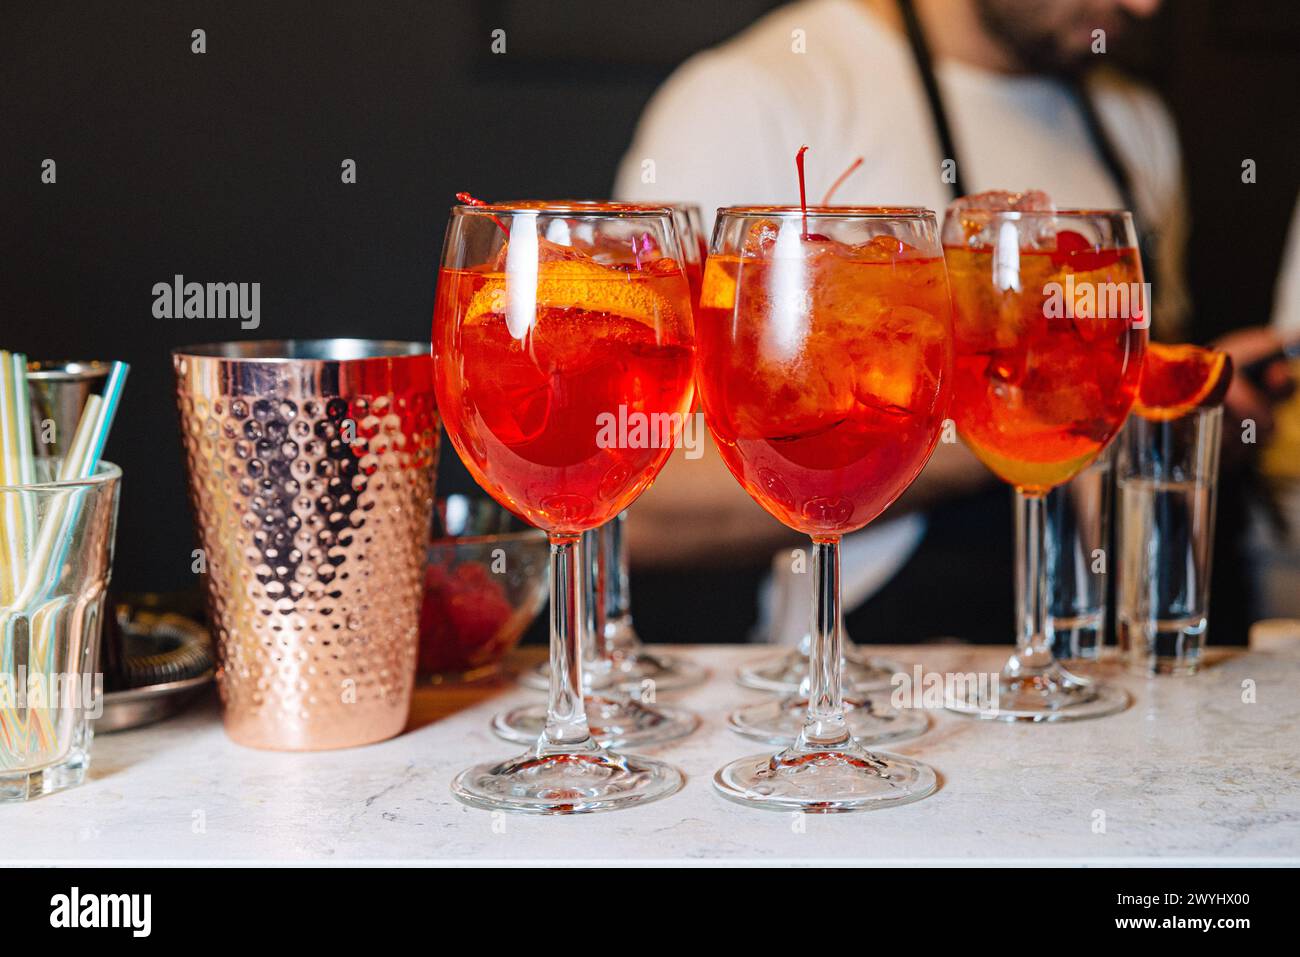 Refreshing Aperitif Spritz cocktails with ice and orange slices, served in wine glasses on a marble bar counter, with a bartender in the background. Stock Photo